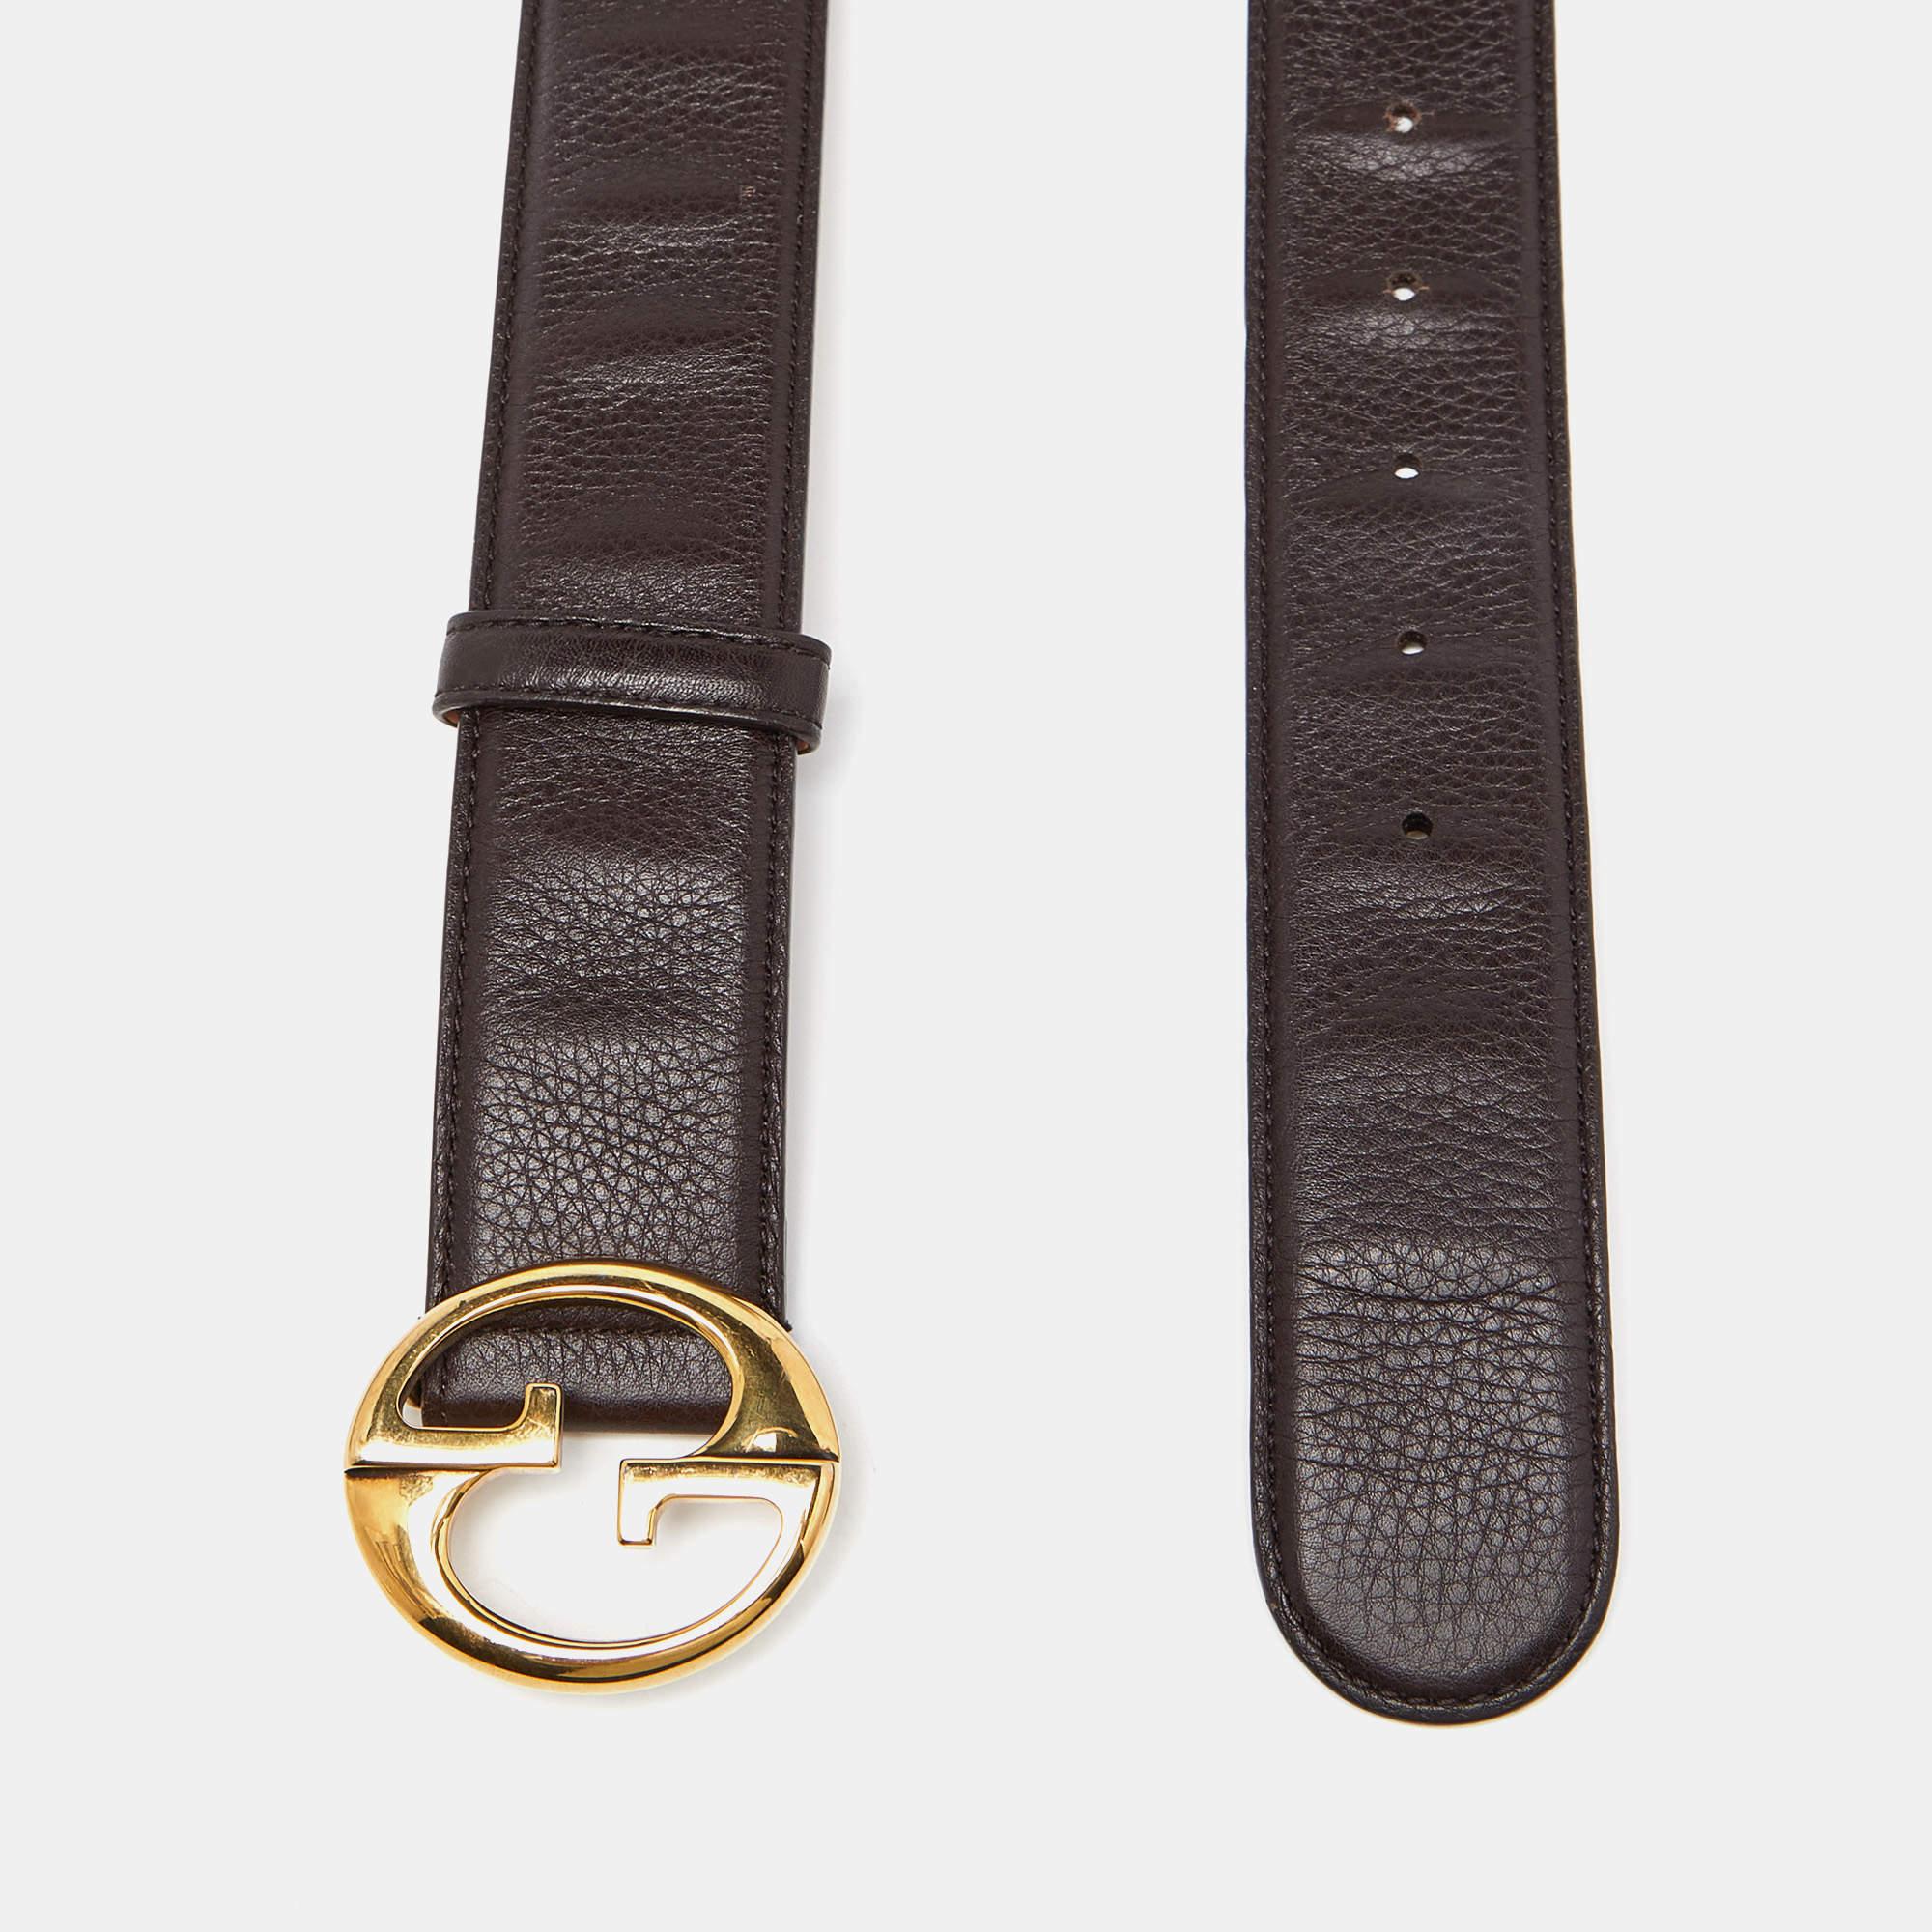 This Gucci belt is crafted from leather. The classic piece has dual shades to match a variety of outfits. It is completed with a gold-tone interlocking G buckle.

